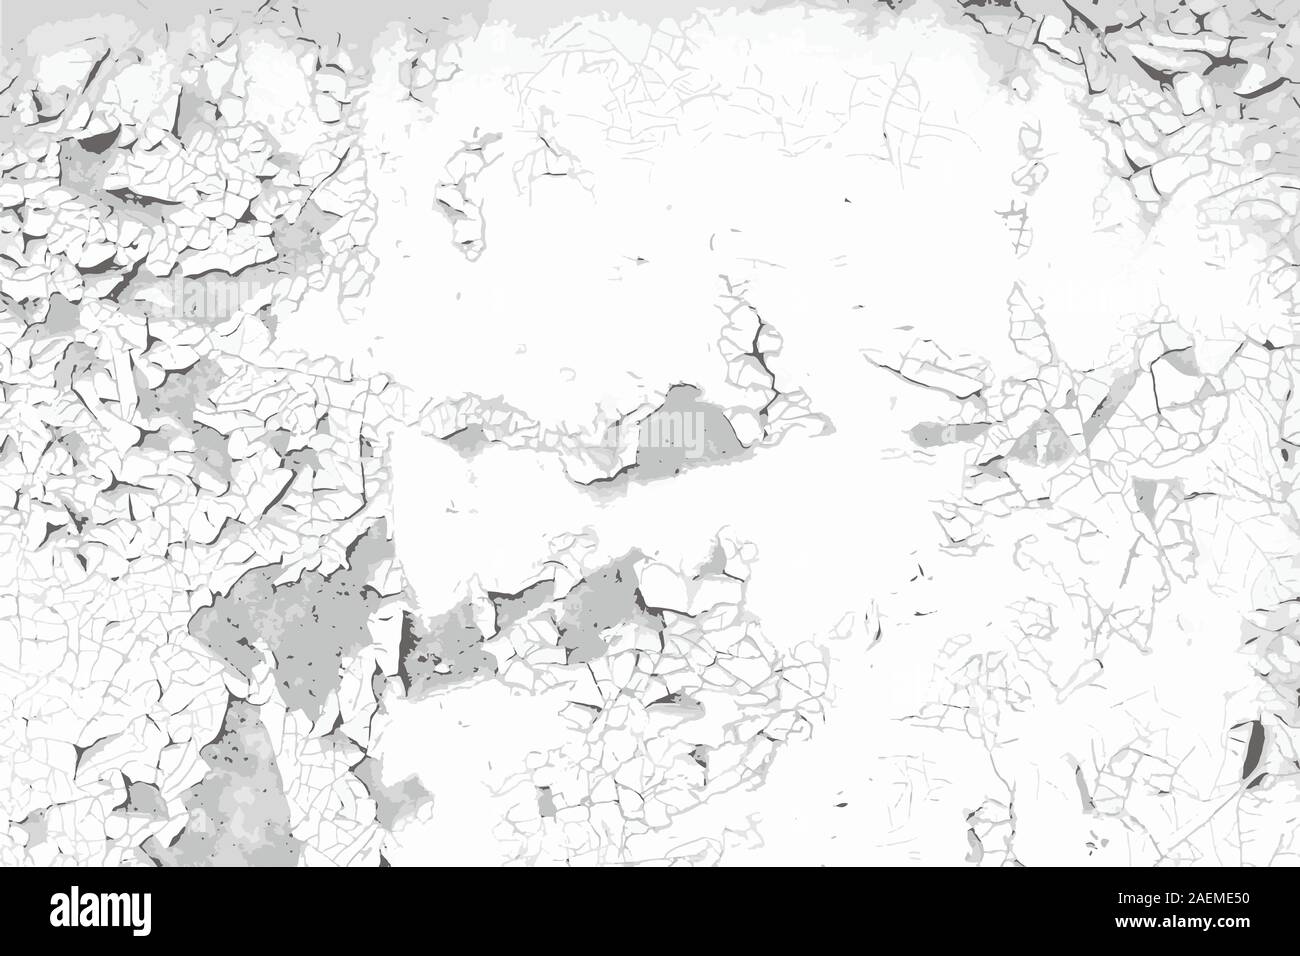 Old cracked painted wall vector background. Grunge black and white texture template for overlay artwork. Stock Vector